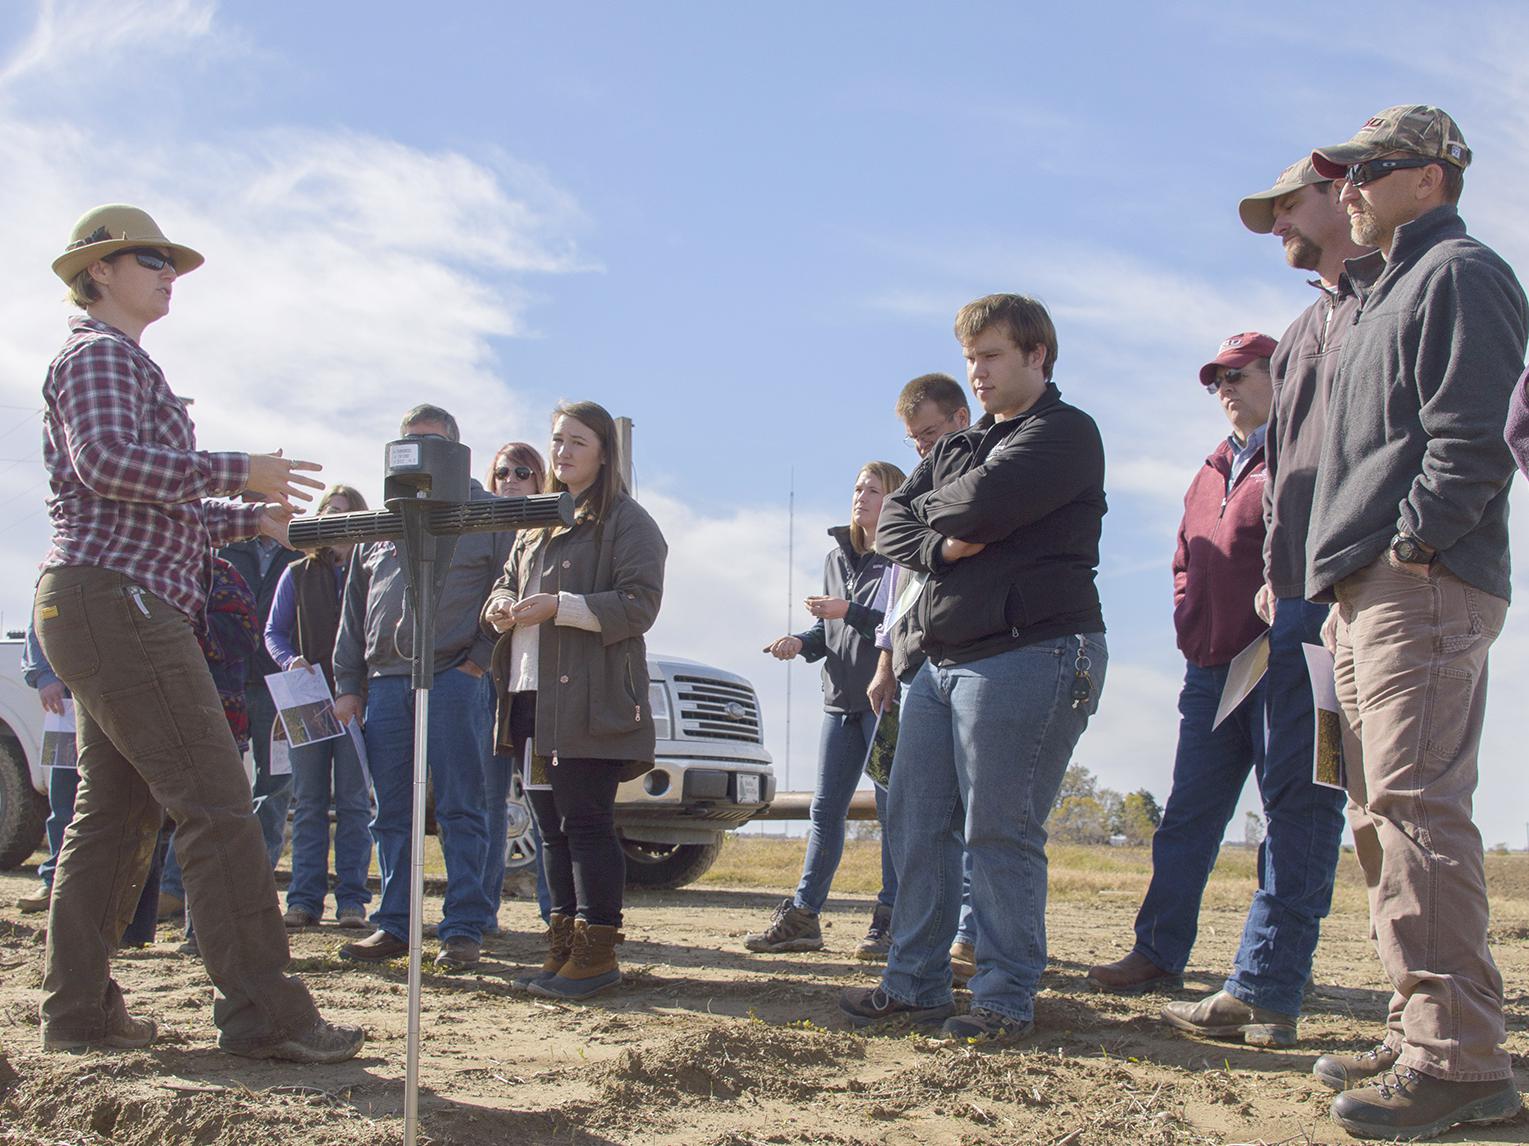 Rachel Stout Evans, a soil scientist with the Natural Resources Conservation Service, speaks to Mississippi State University Extension agents at a row crop farm in Shaw, Mississippi.